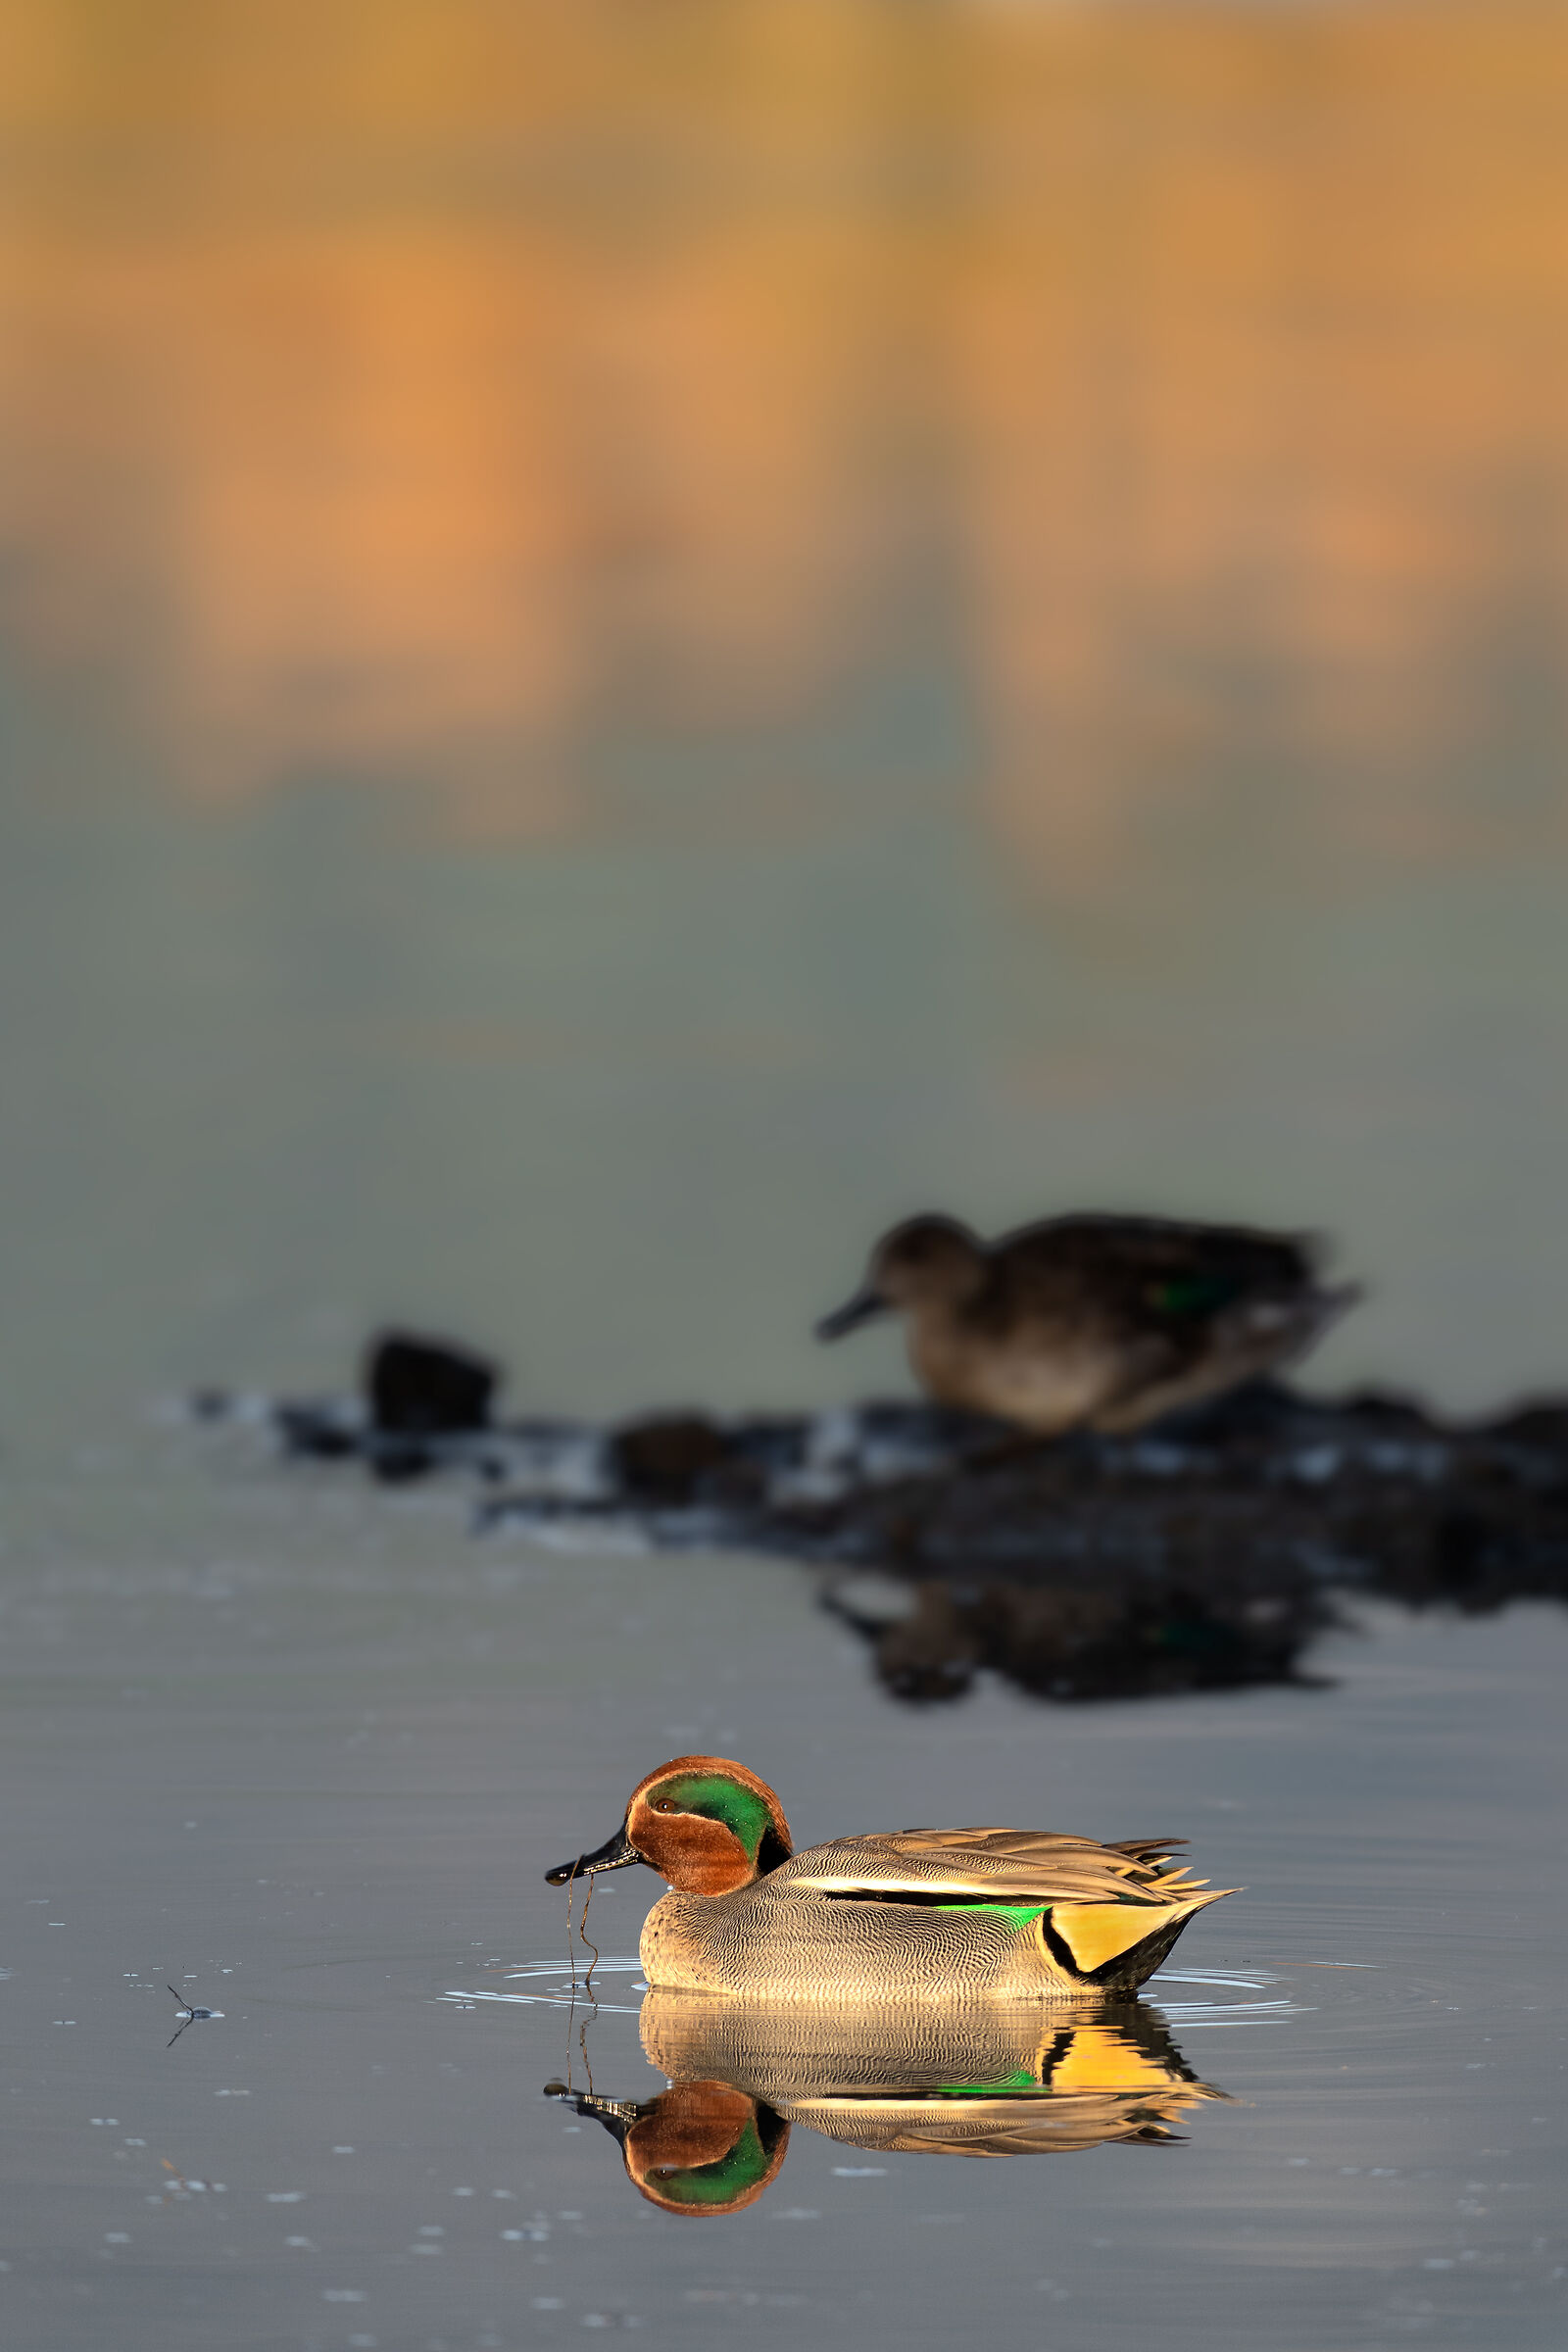 Teal at sunset...